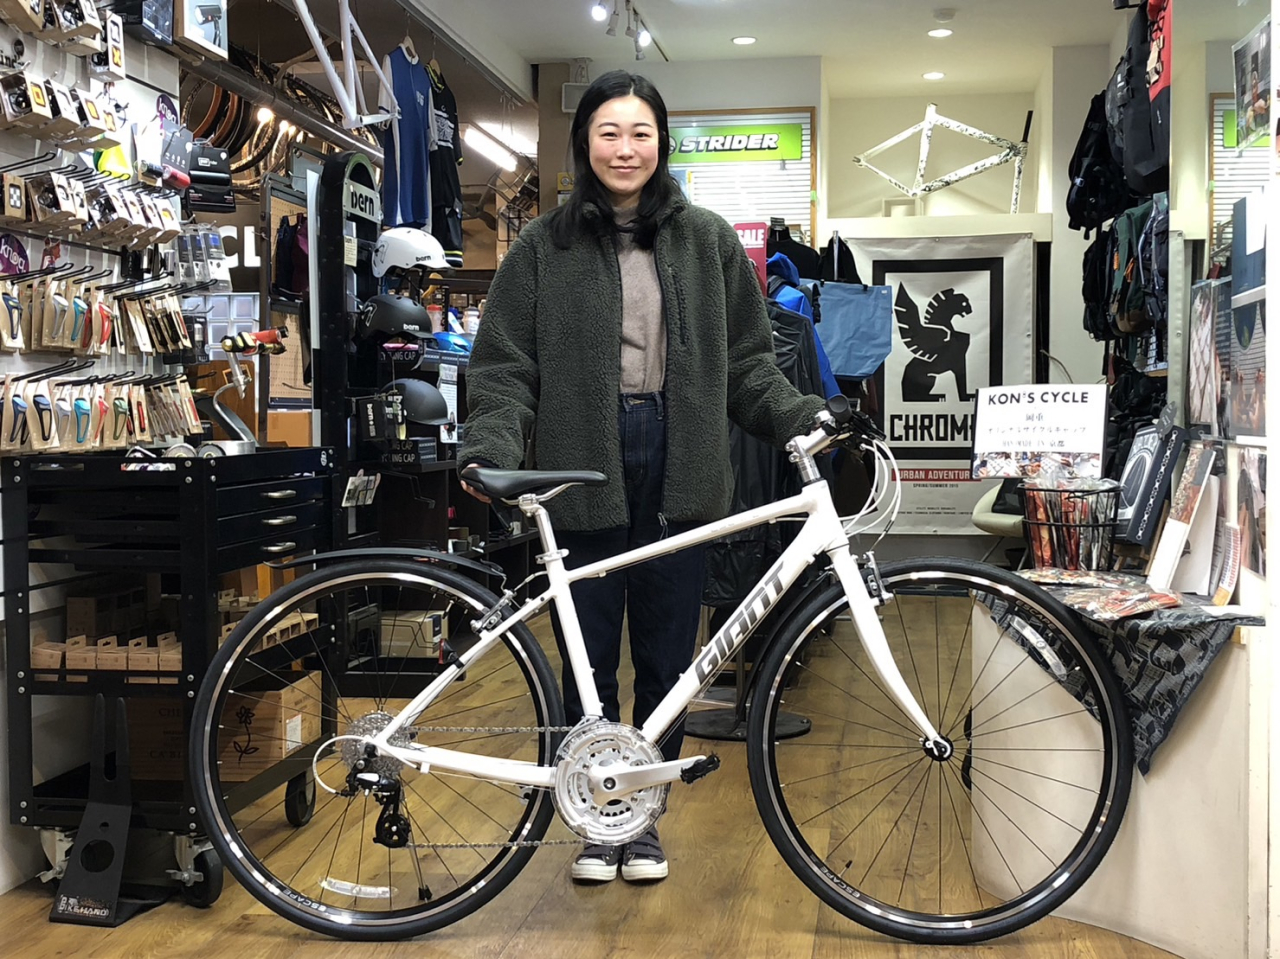 GIANT【ESCAPE R3】自転車とお客様のご紹介☆ | コンズサイクルの 